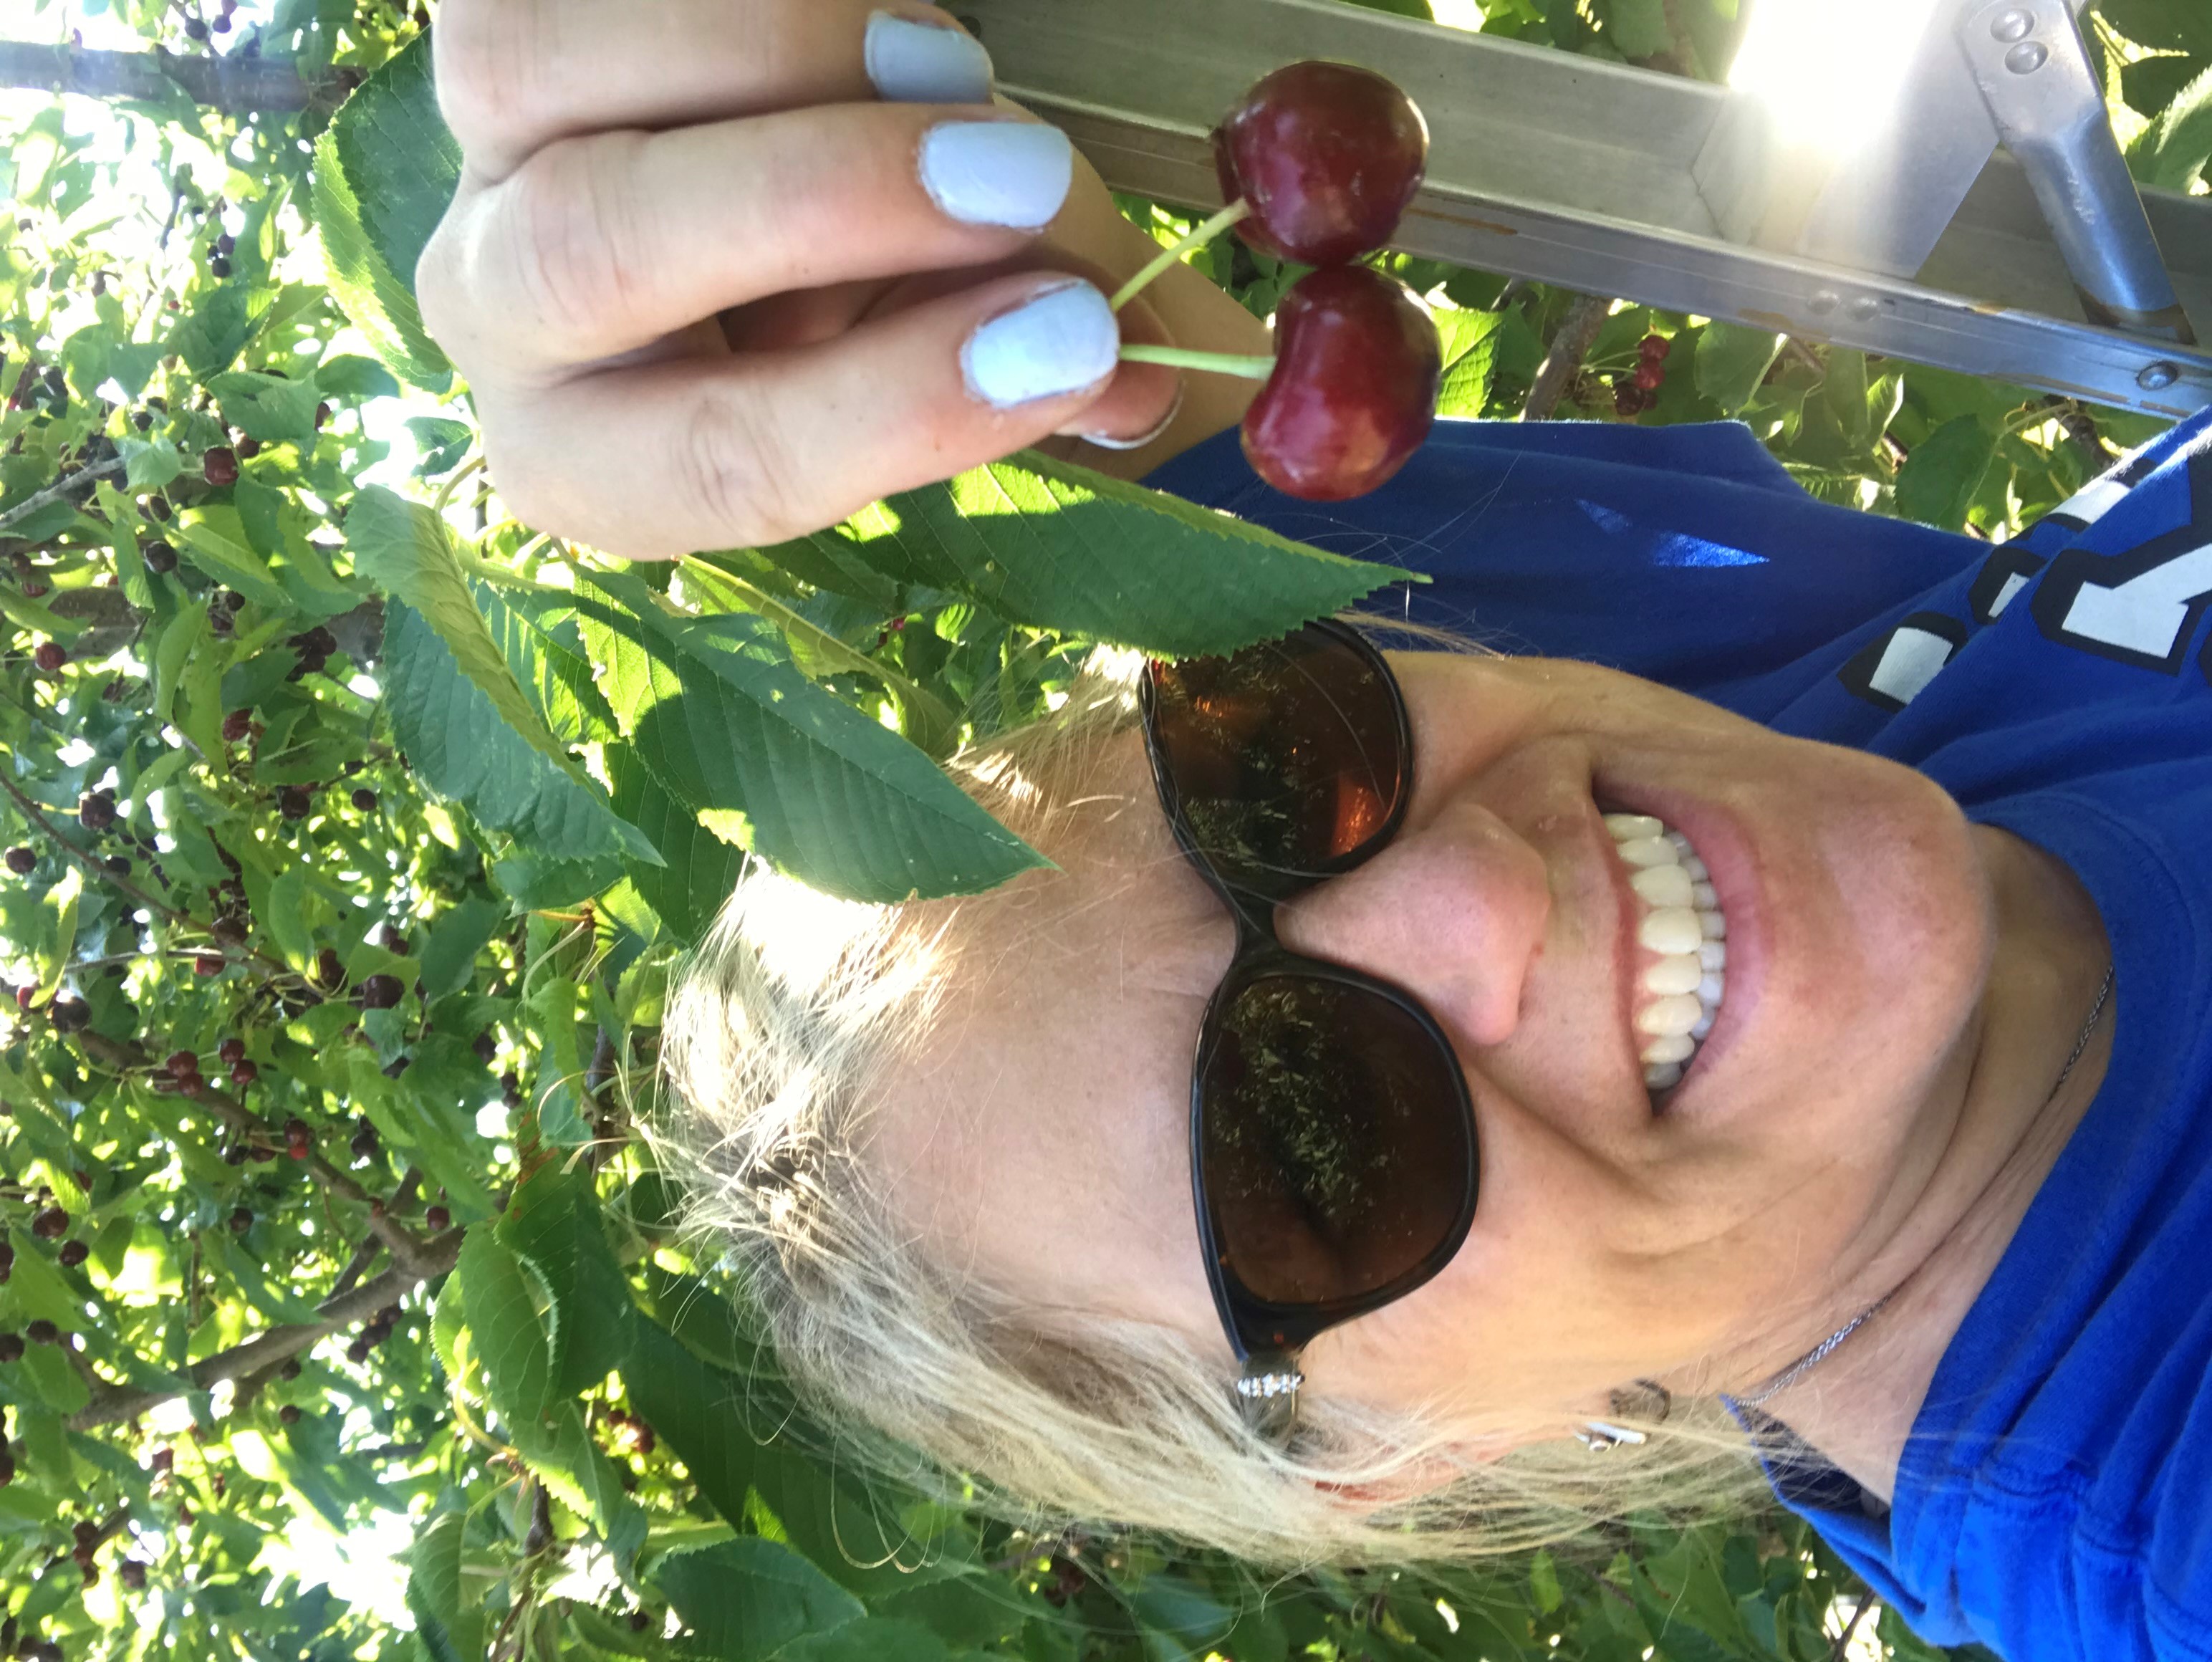 A woman with sunglasses on taking a selfie in her garden while holding up freshly picked cherries